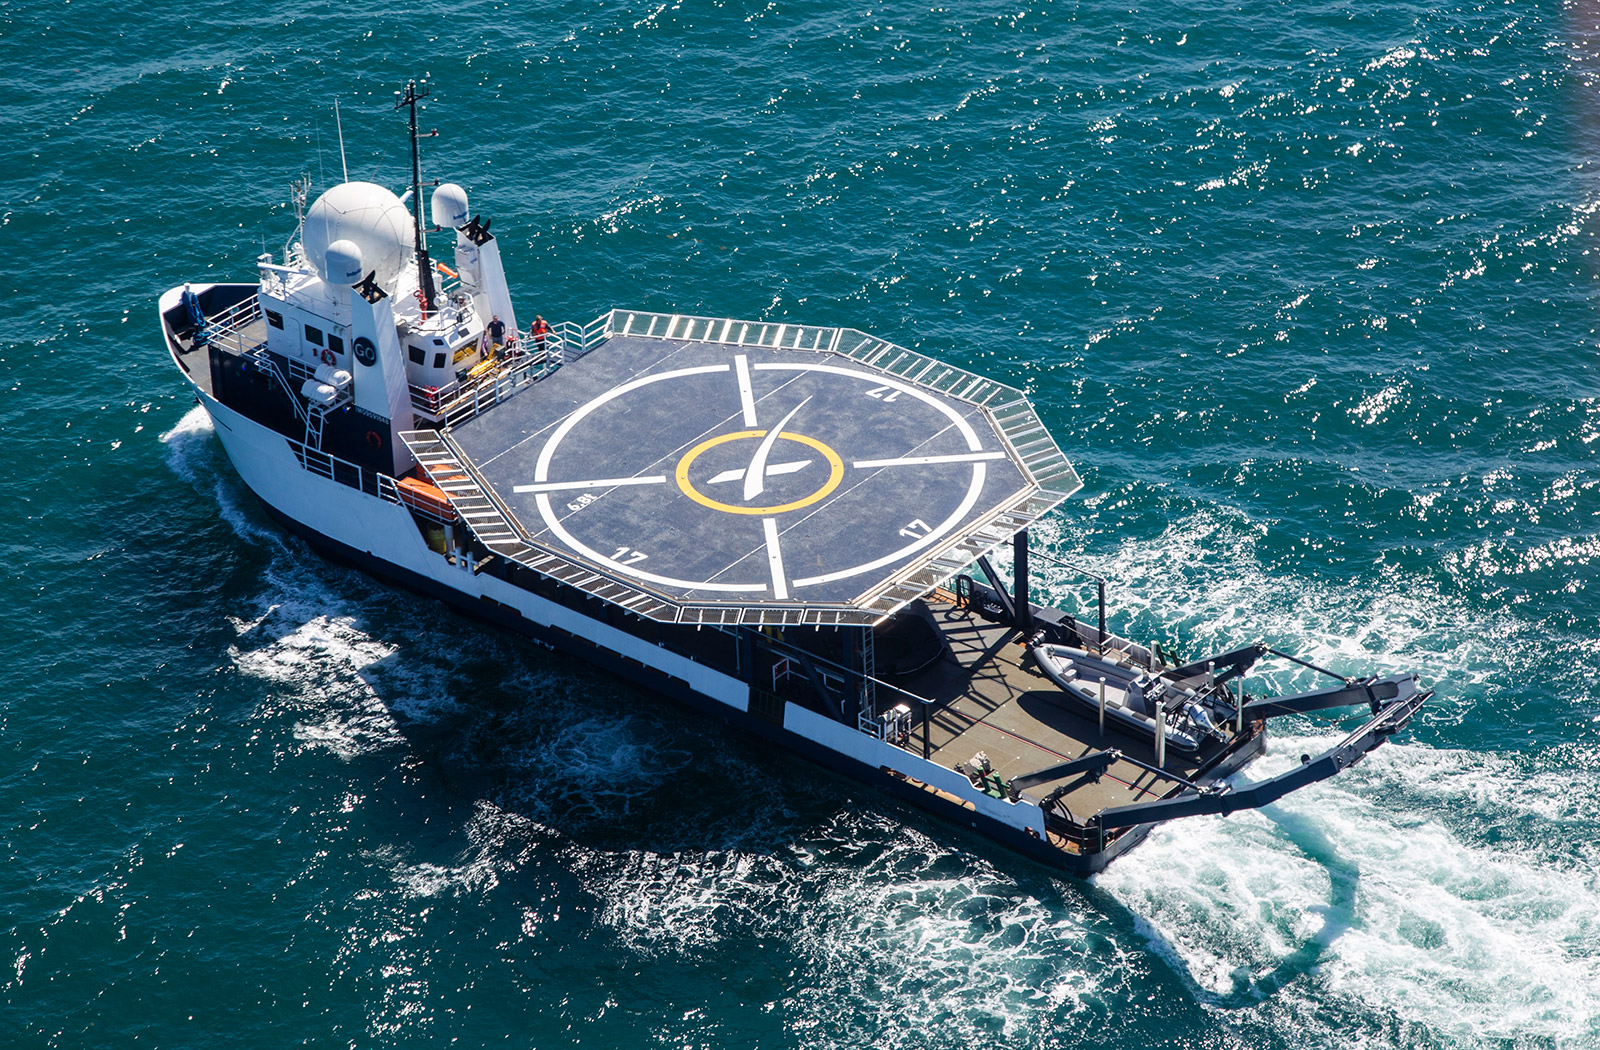 SpaceX's recovery ship, GO Searcher